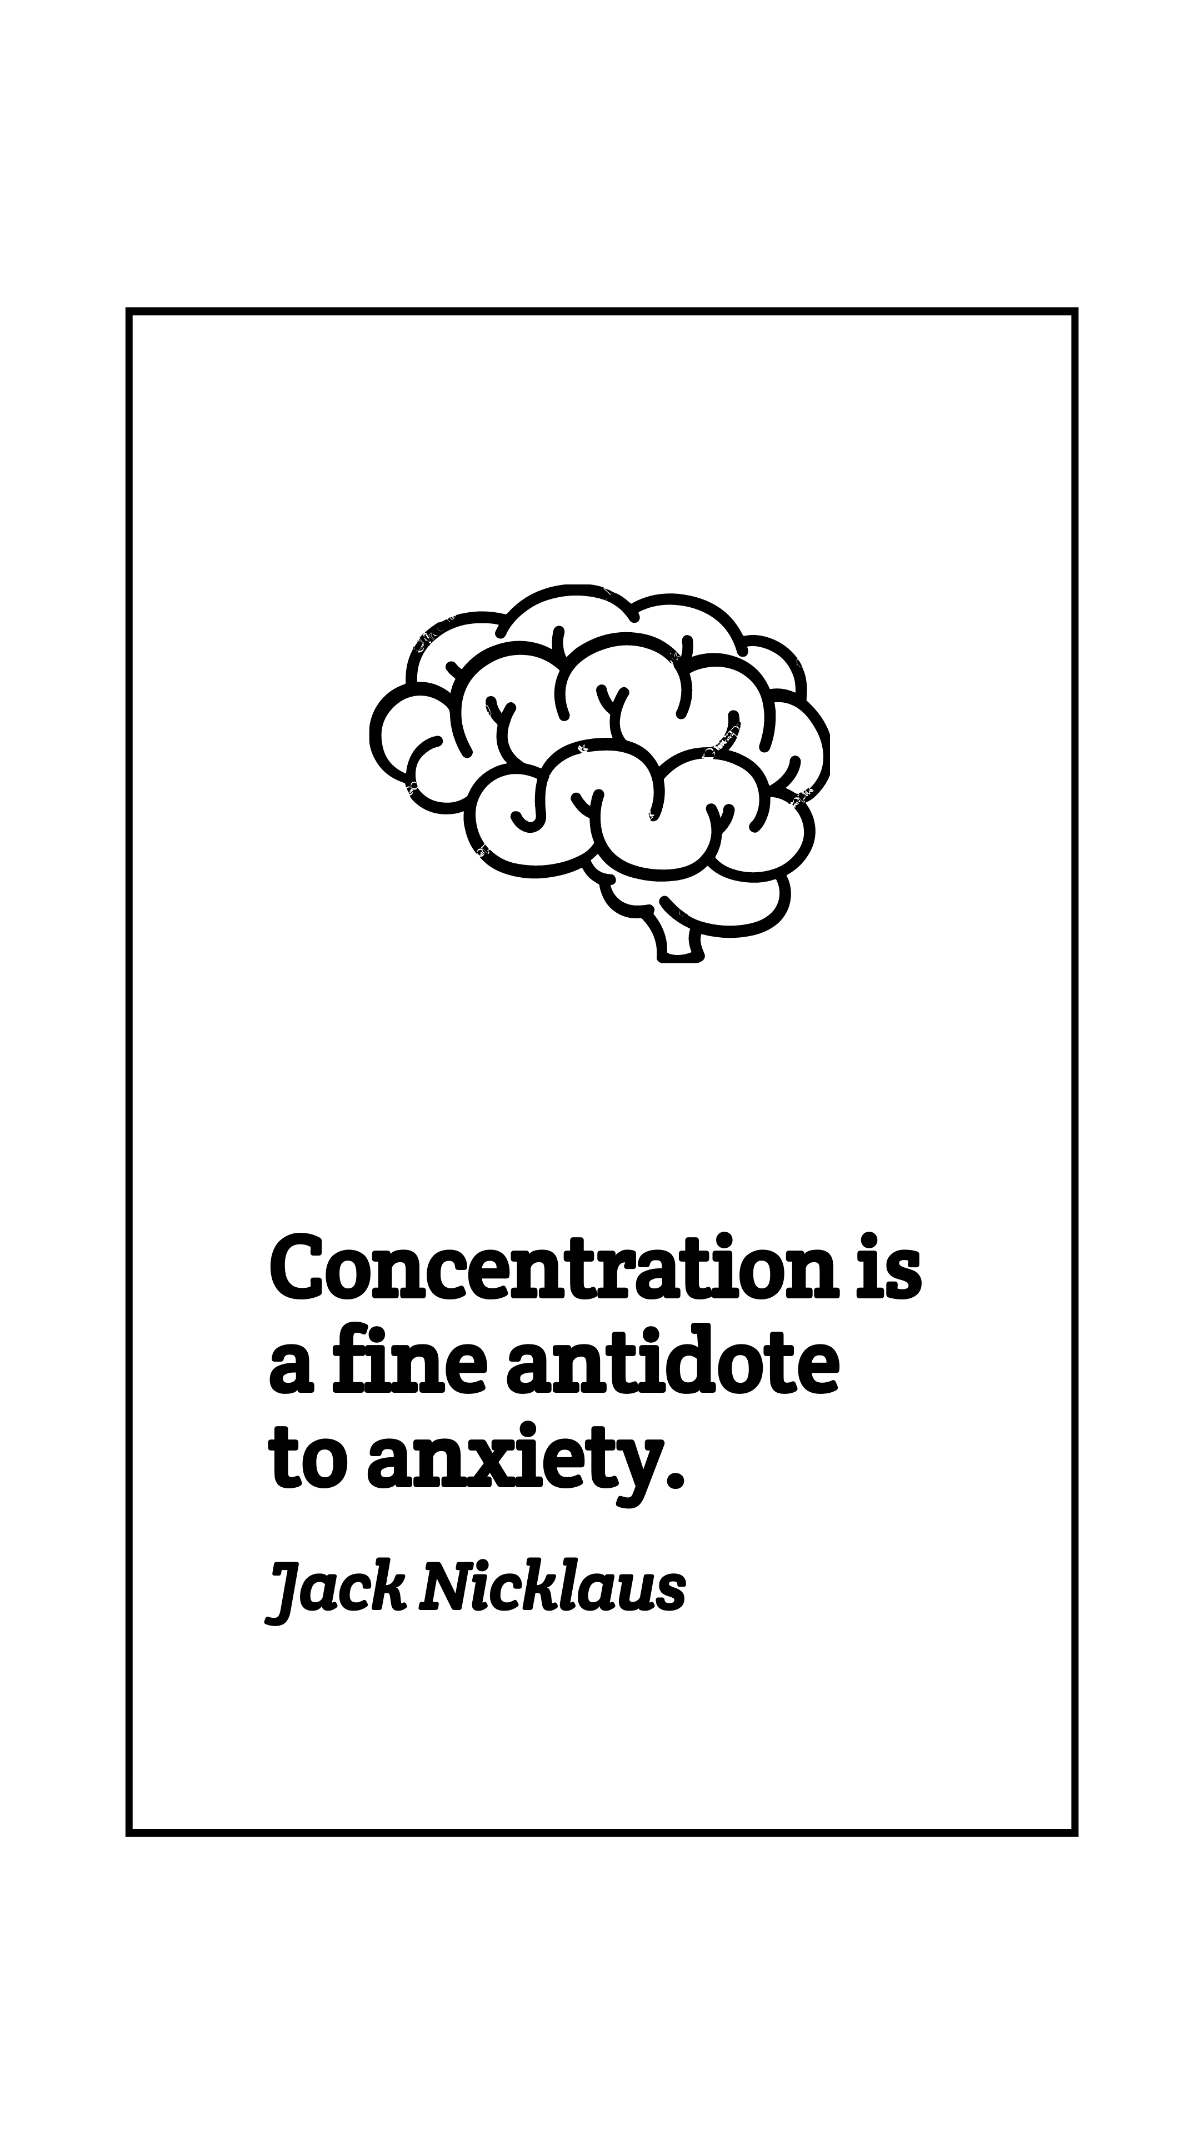 Free Jack Nicklaus - Concentration is a fine antidote to anxiety. Template